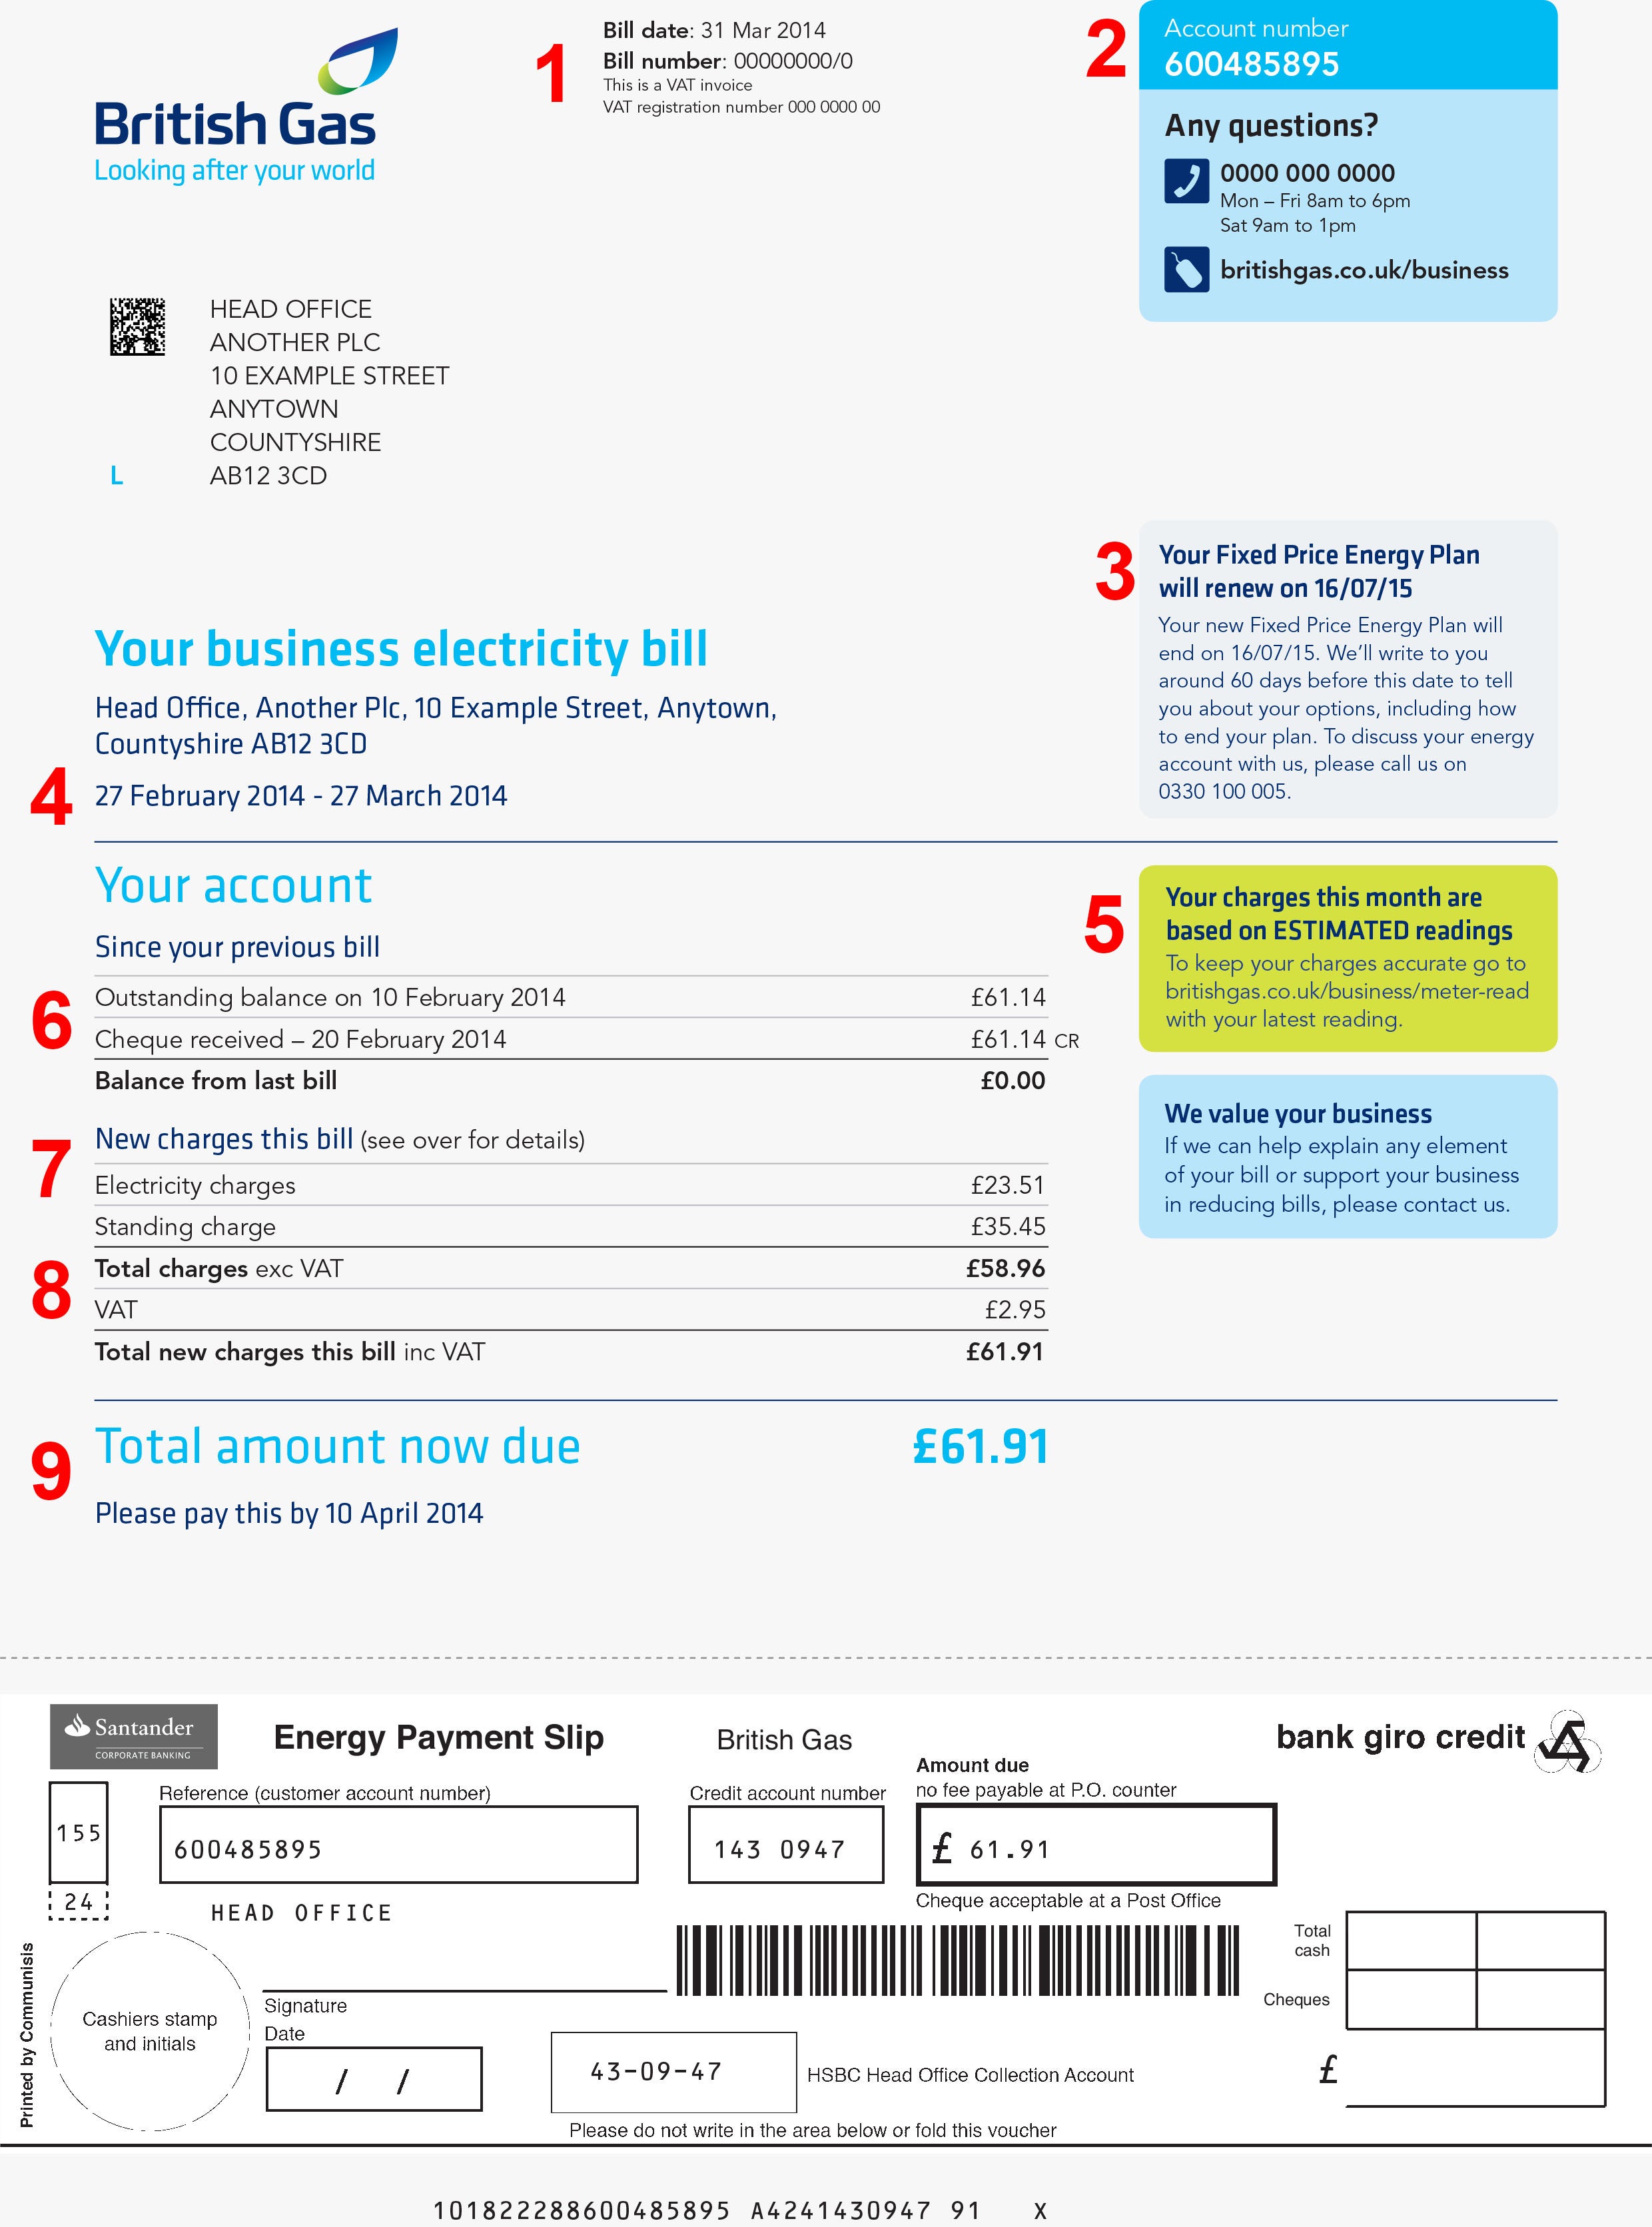 Page one of a British Gas business energy bill with payment giro attached